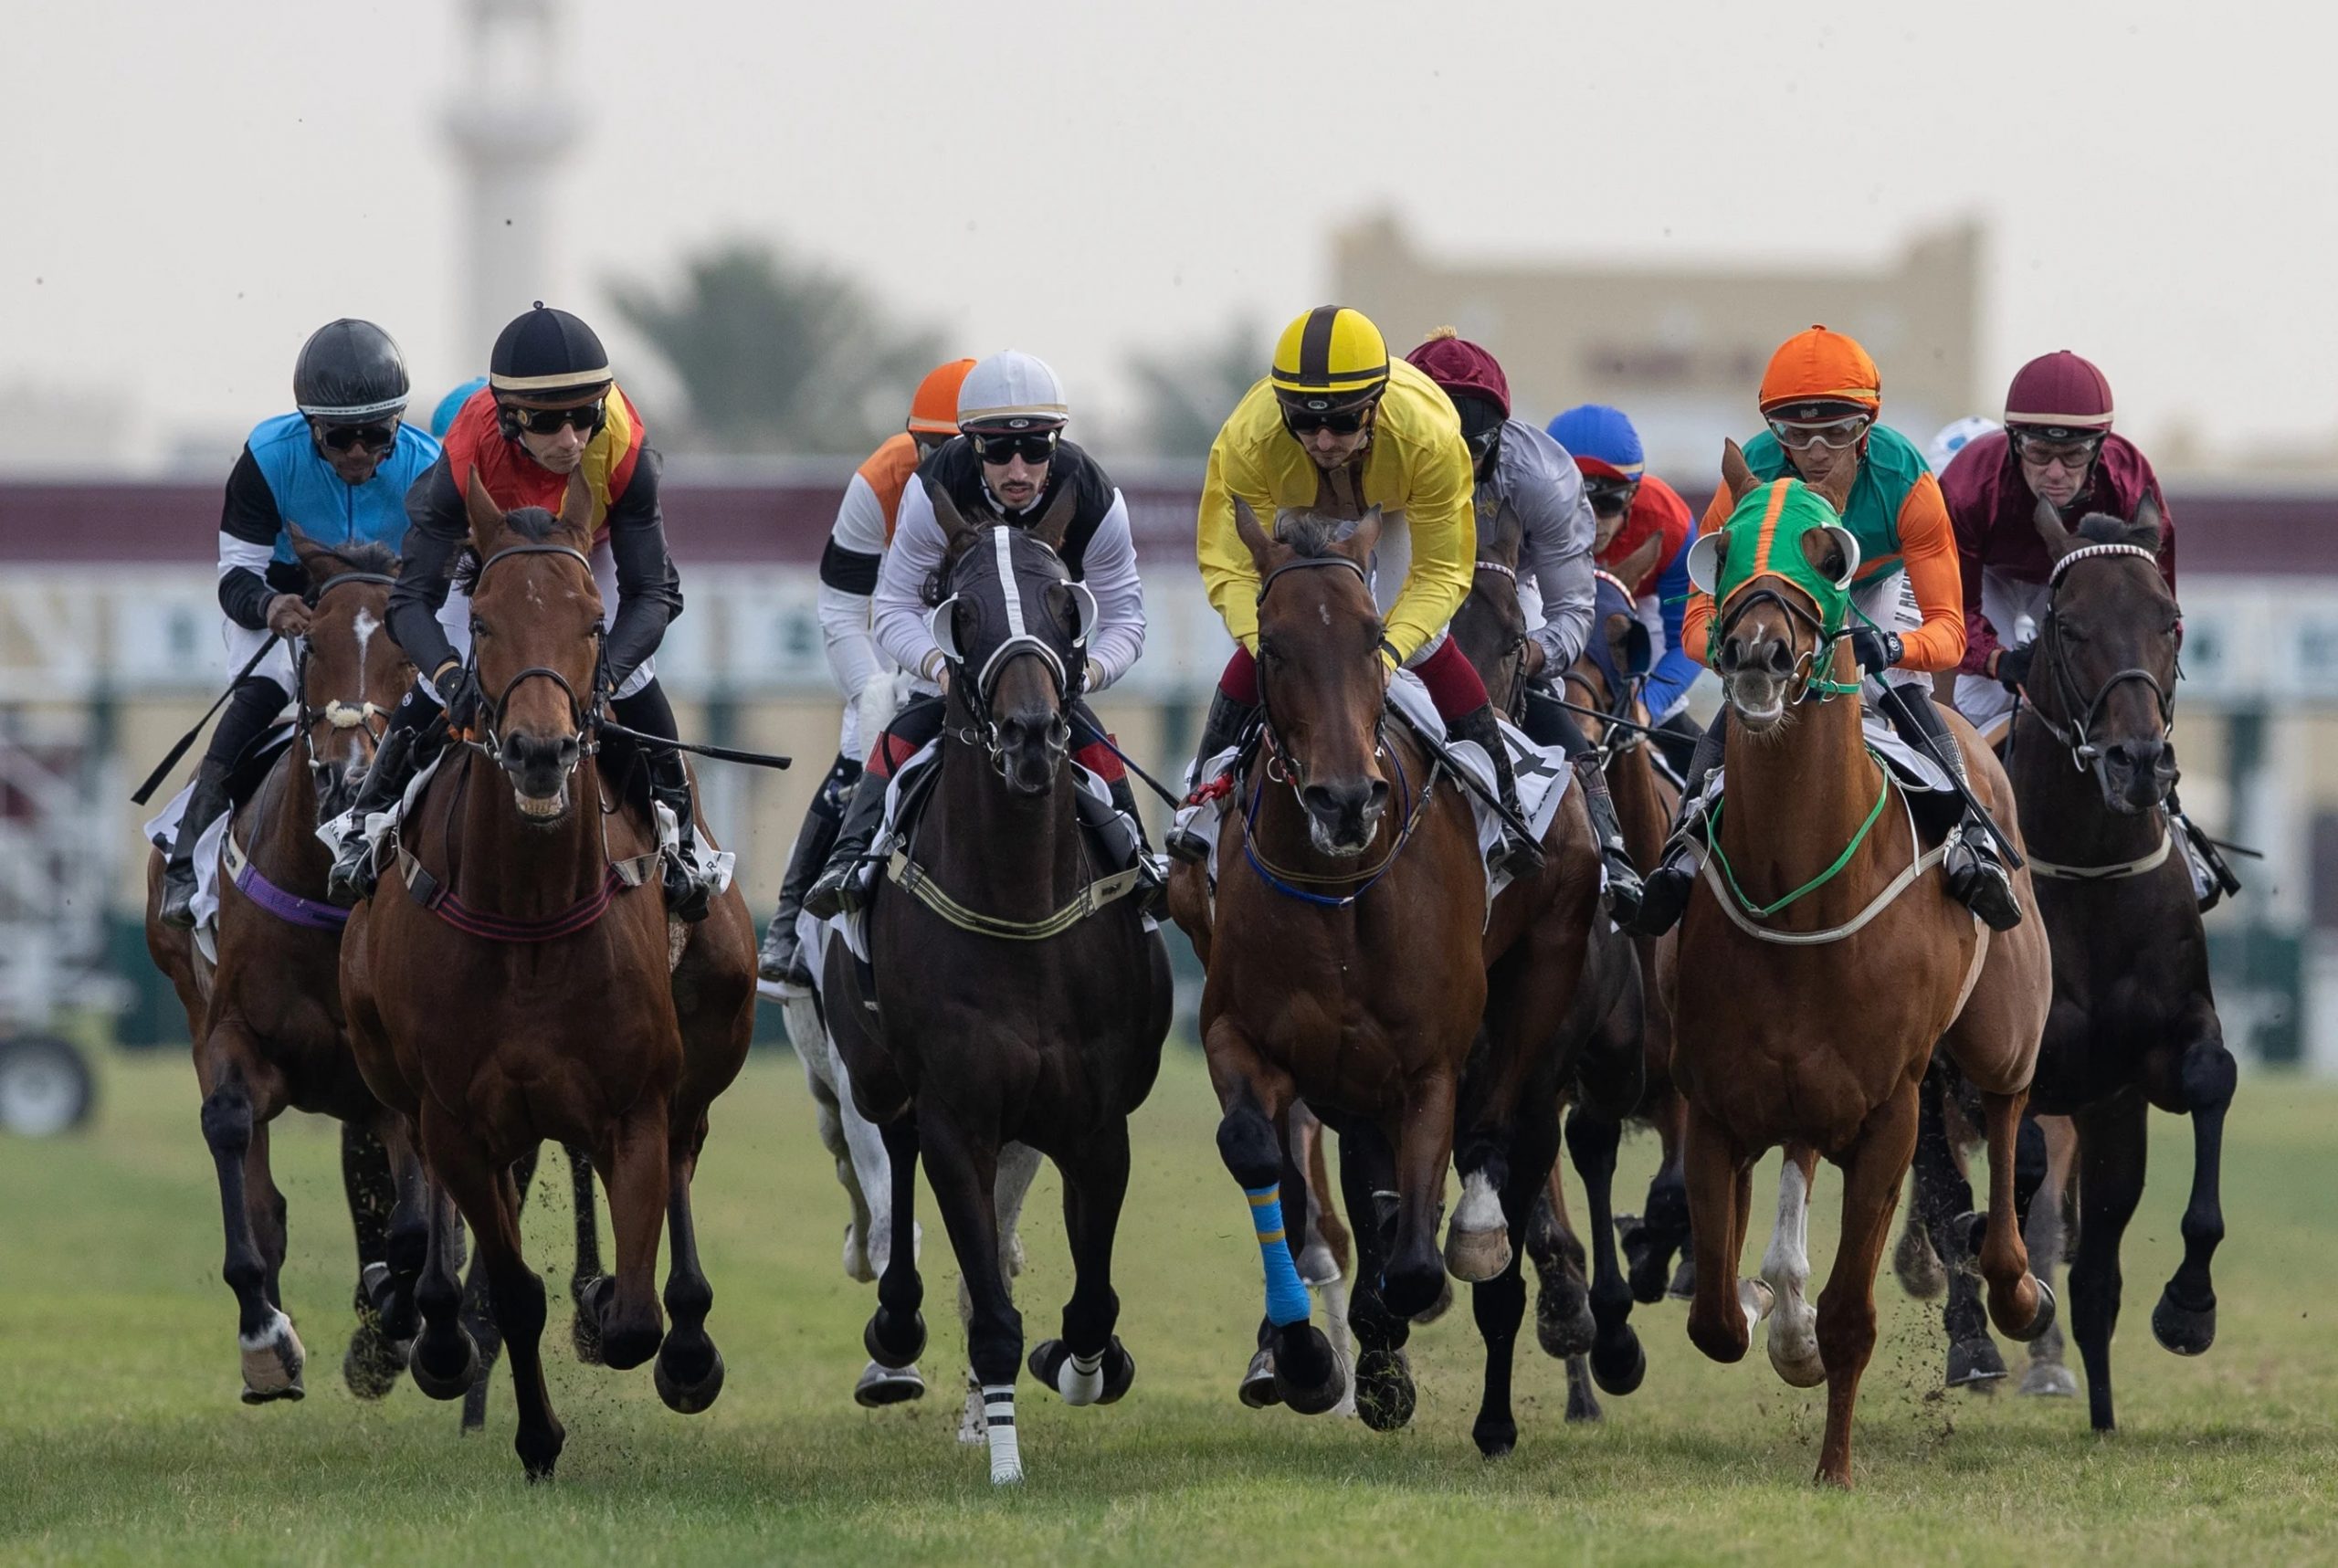 QREC Announces Prize Increase for 2023-24 Horseraces